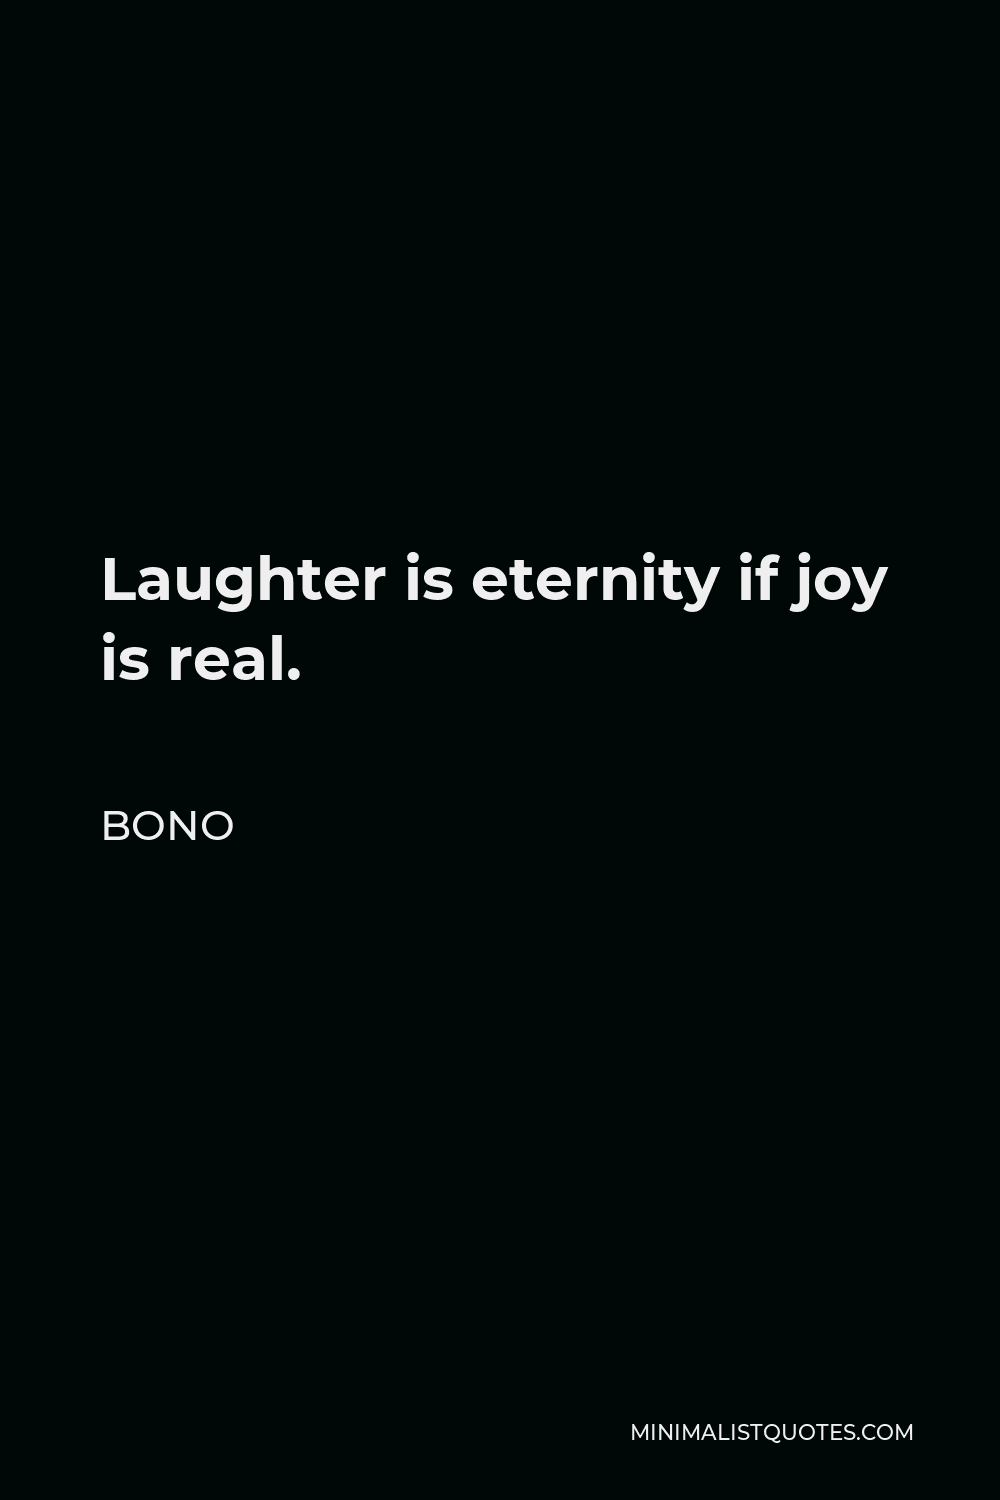 Bono Quote - Laughter is eternity if joy is real.